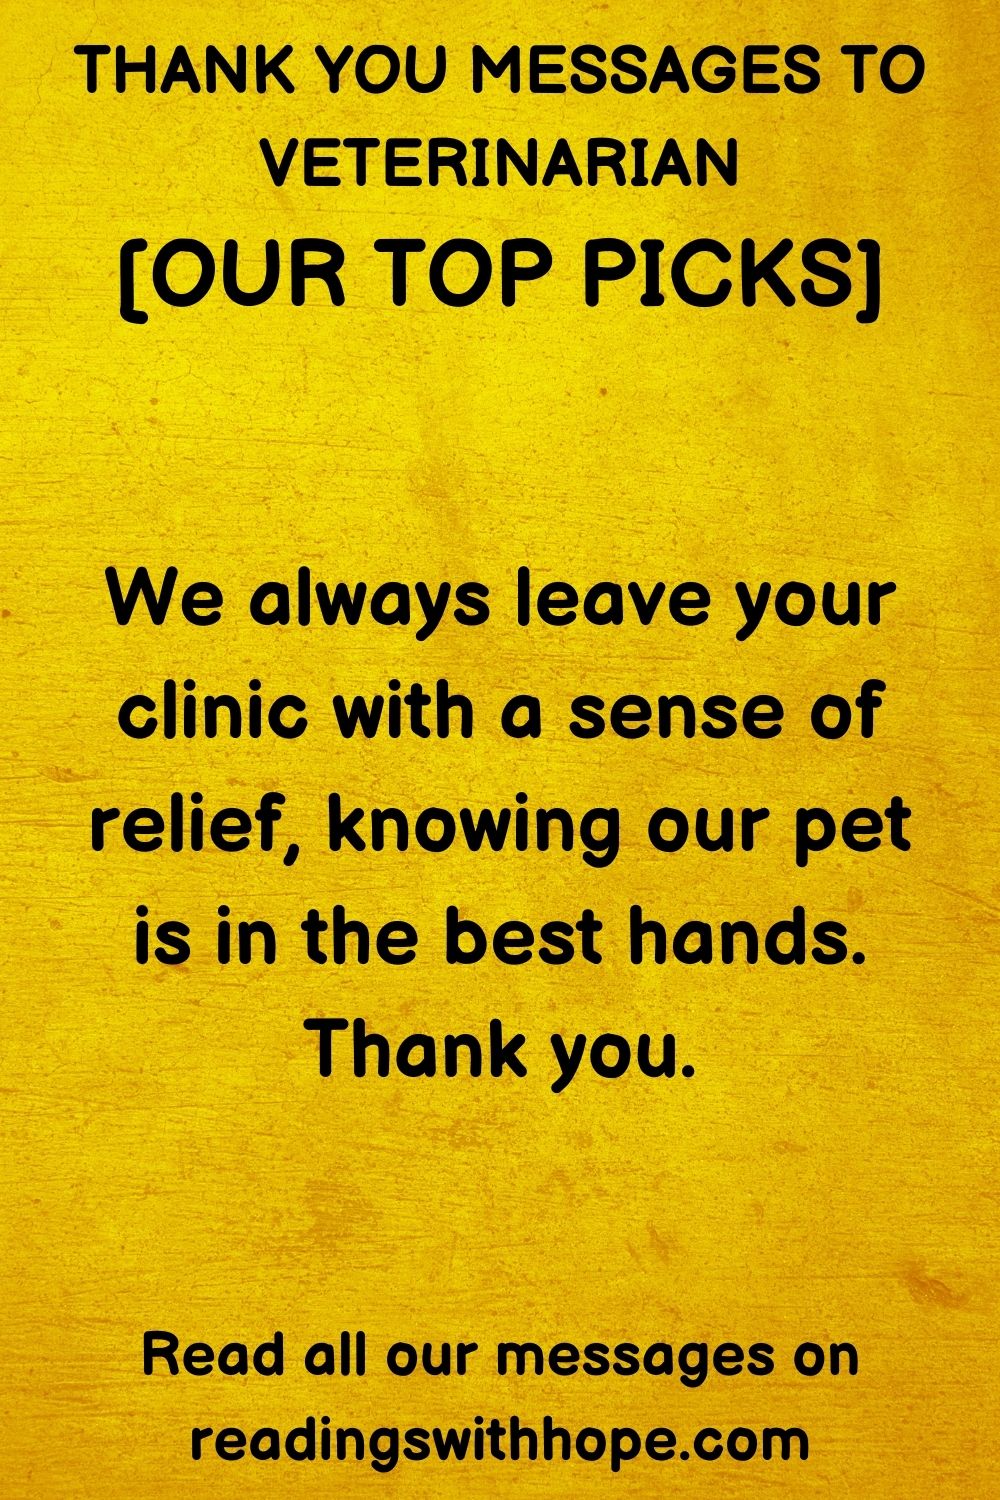 Thank You Message to Veterinarian